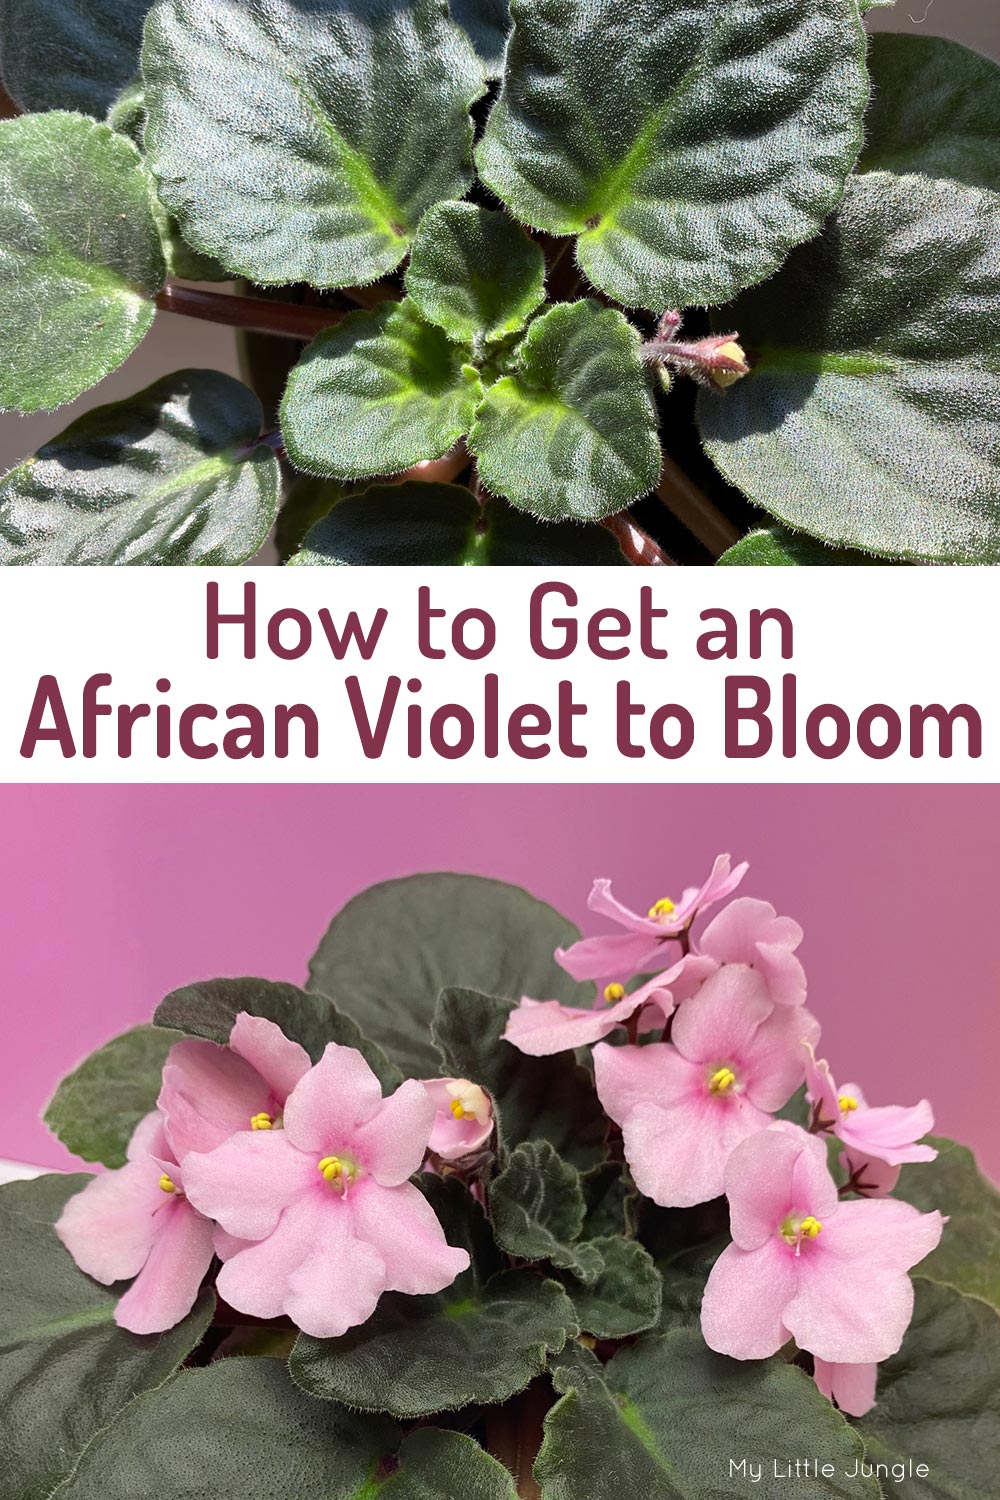 How to Get an African Violet to Bloom